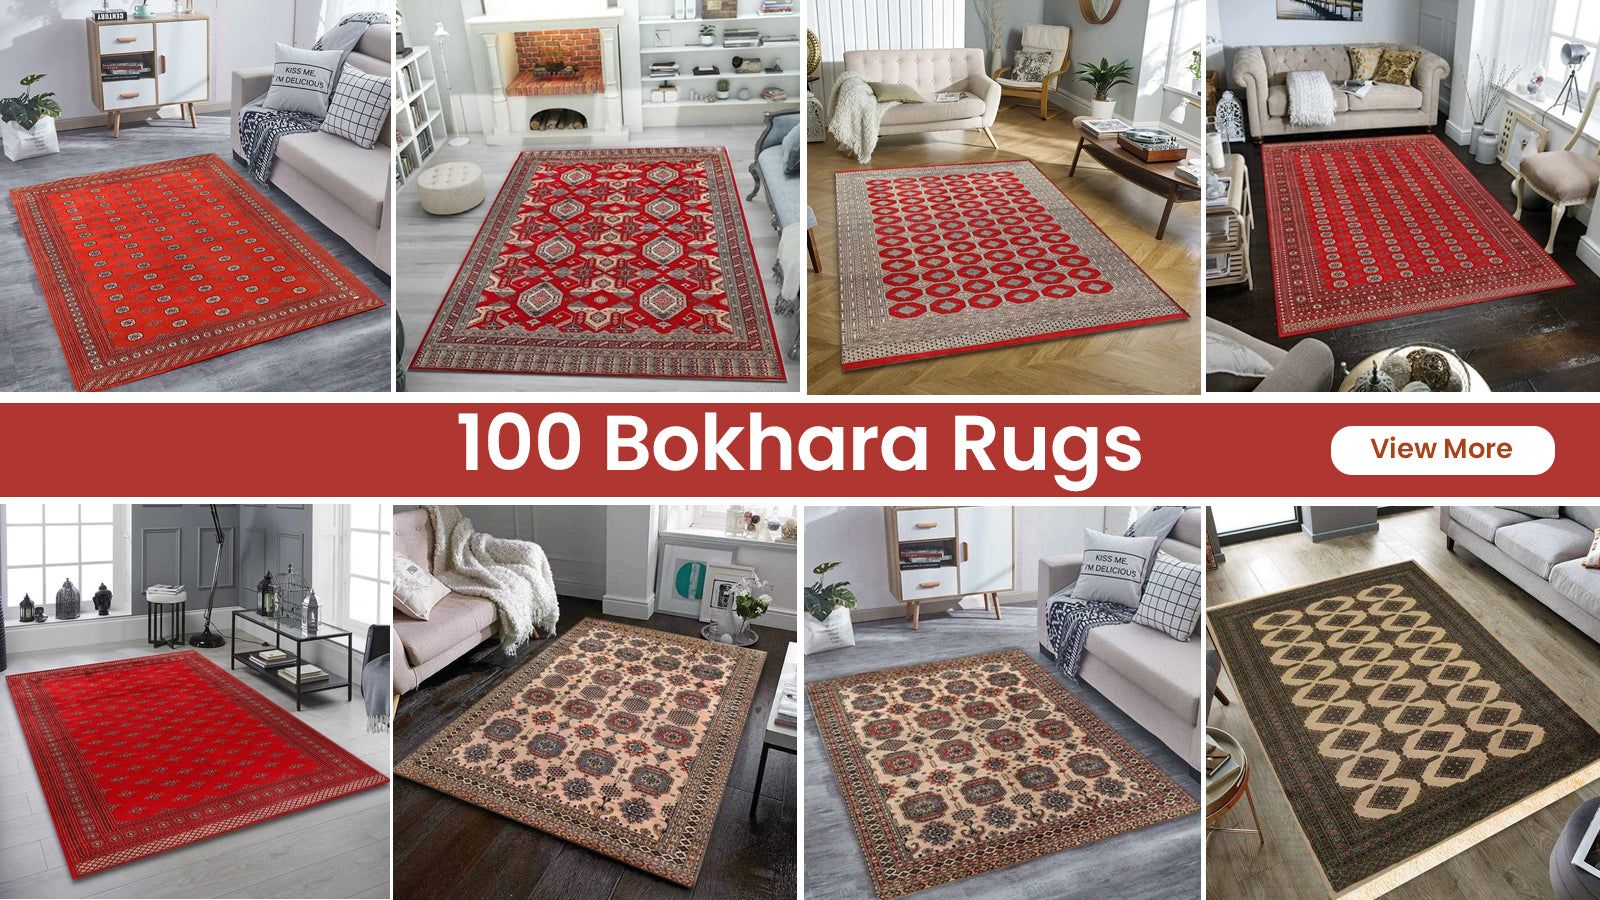 5 Steps To Clean Bokhara Rugs Rugknots